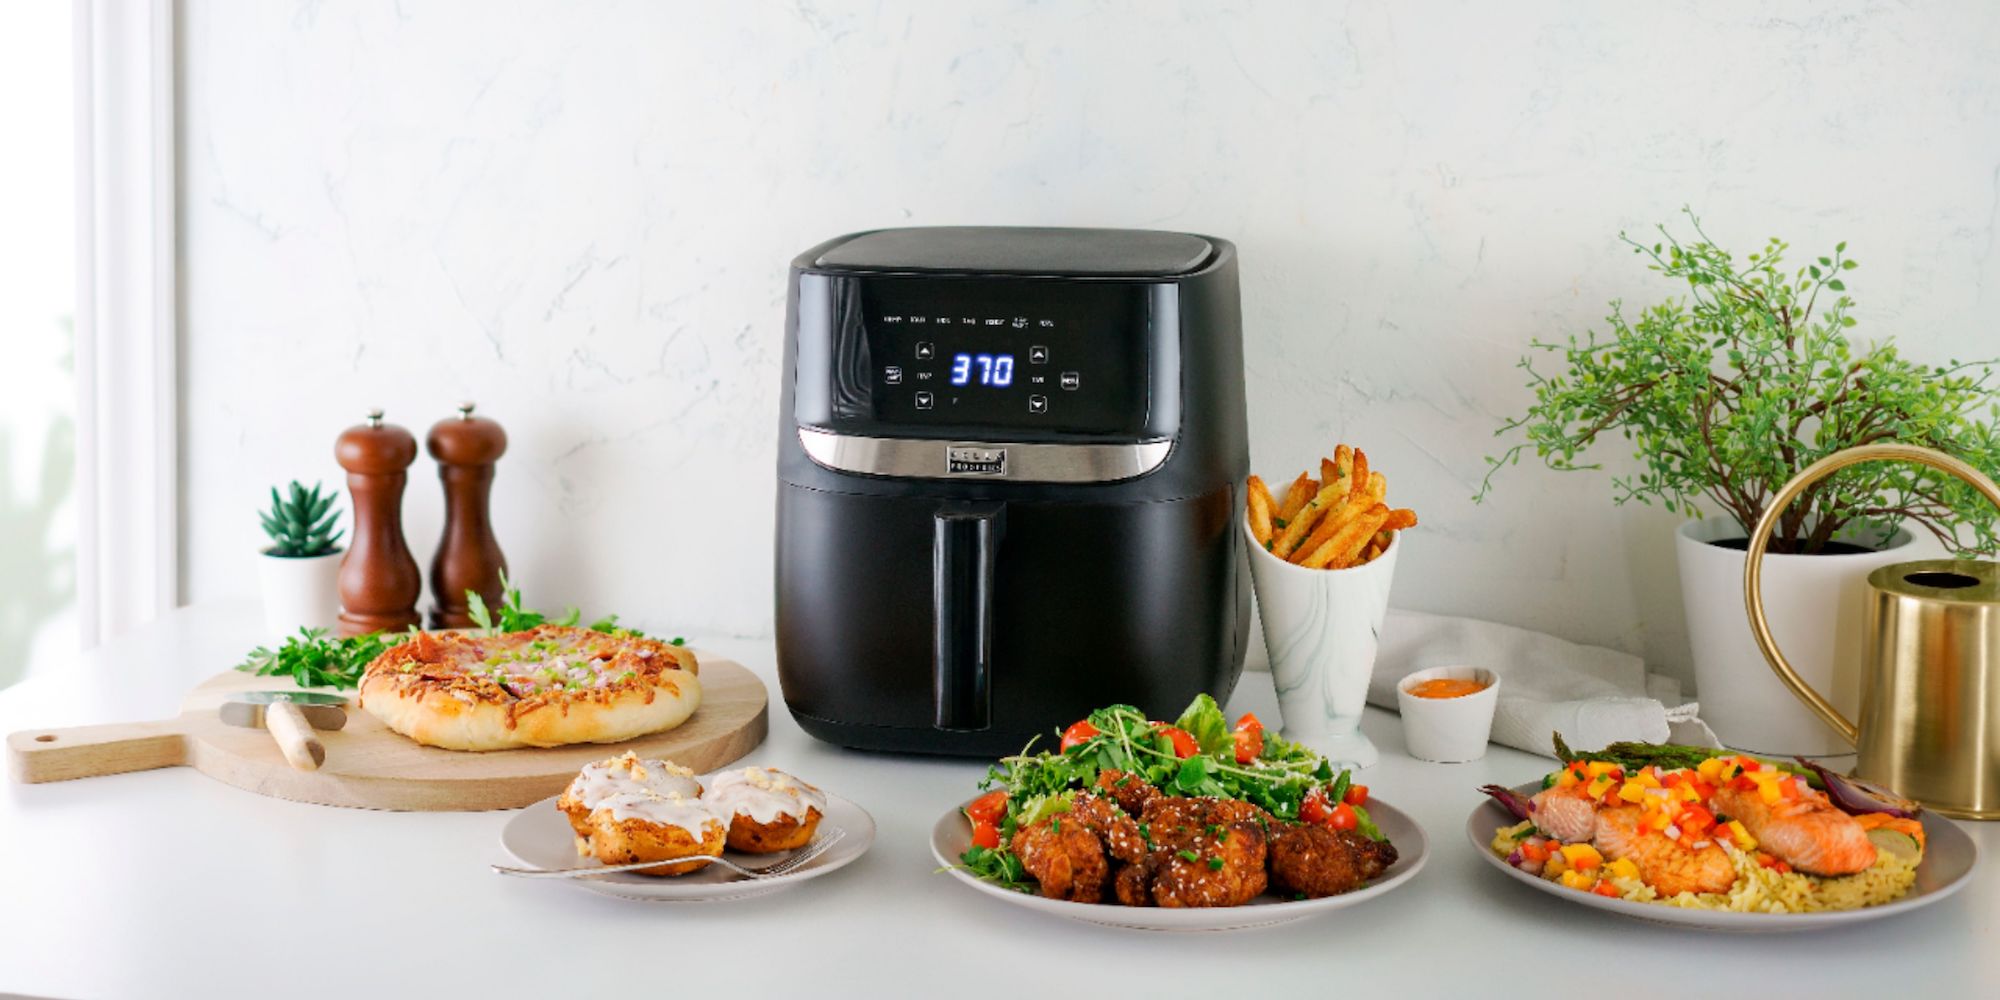 Bella's Pro 6-qt. Touchscreen Air Fryer hits one of its best